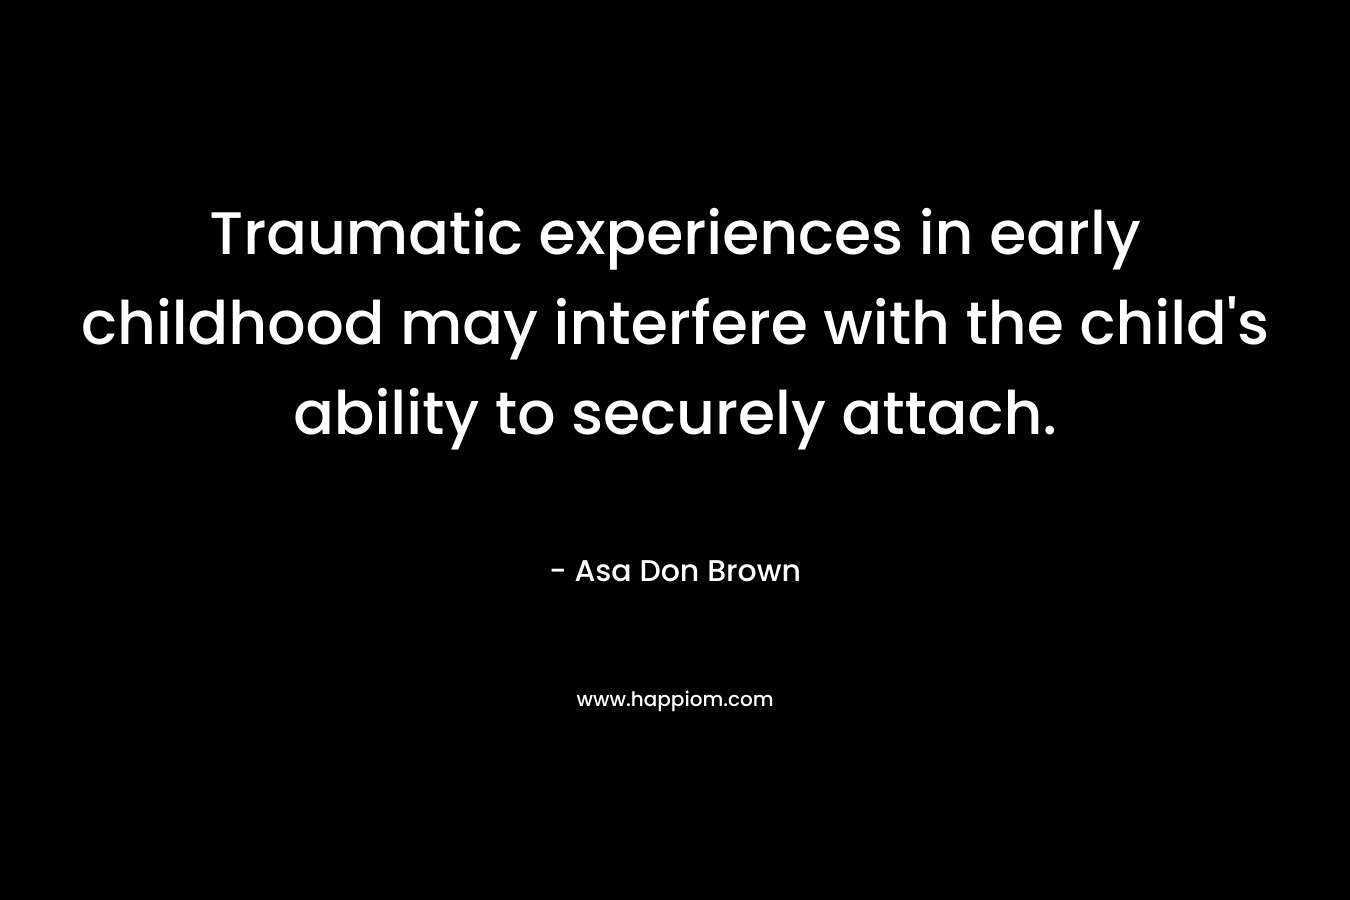 Traumatic experiences in early childhood may interfere with the child’s ability to securely attach. – Asa Don Brown